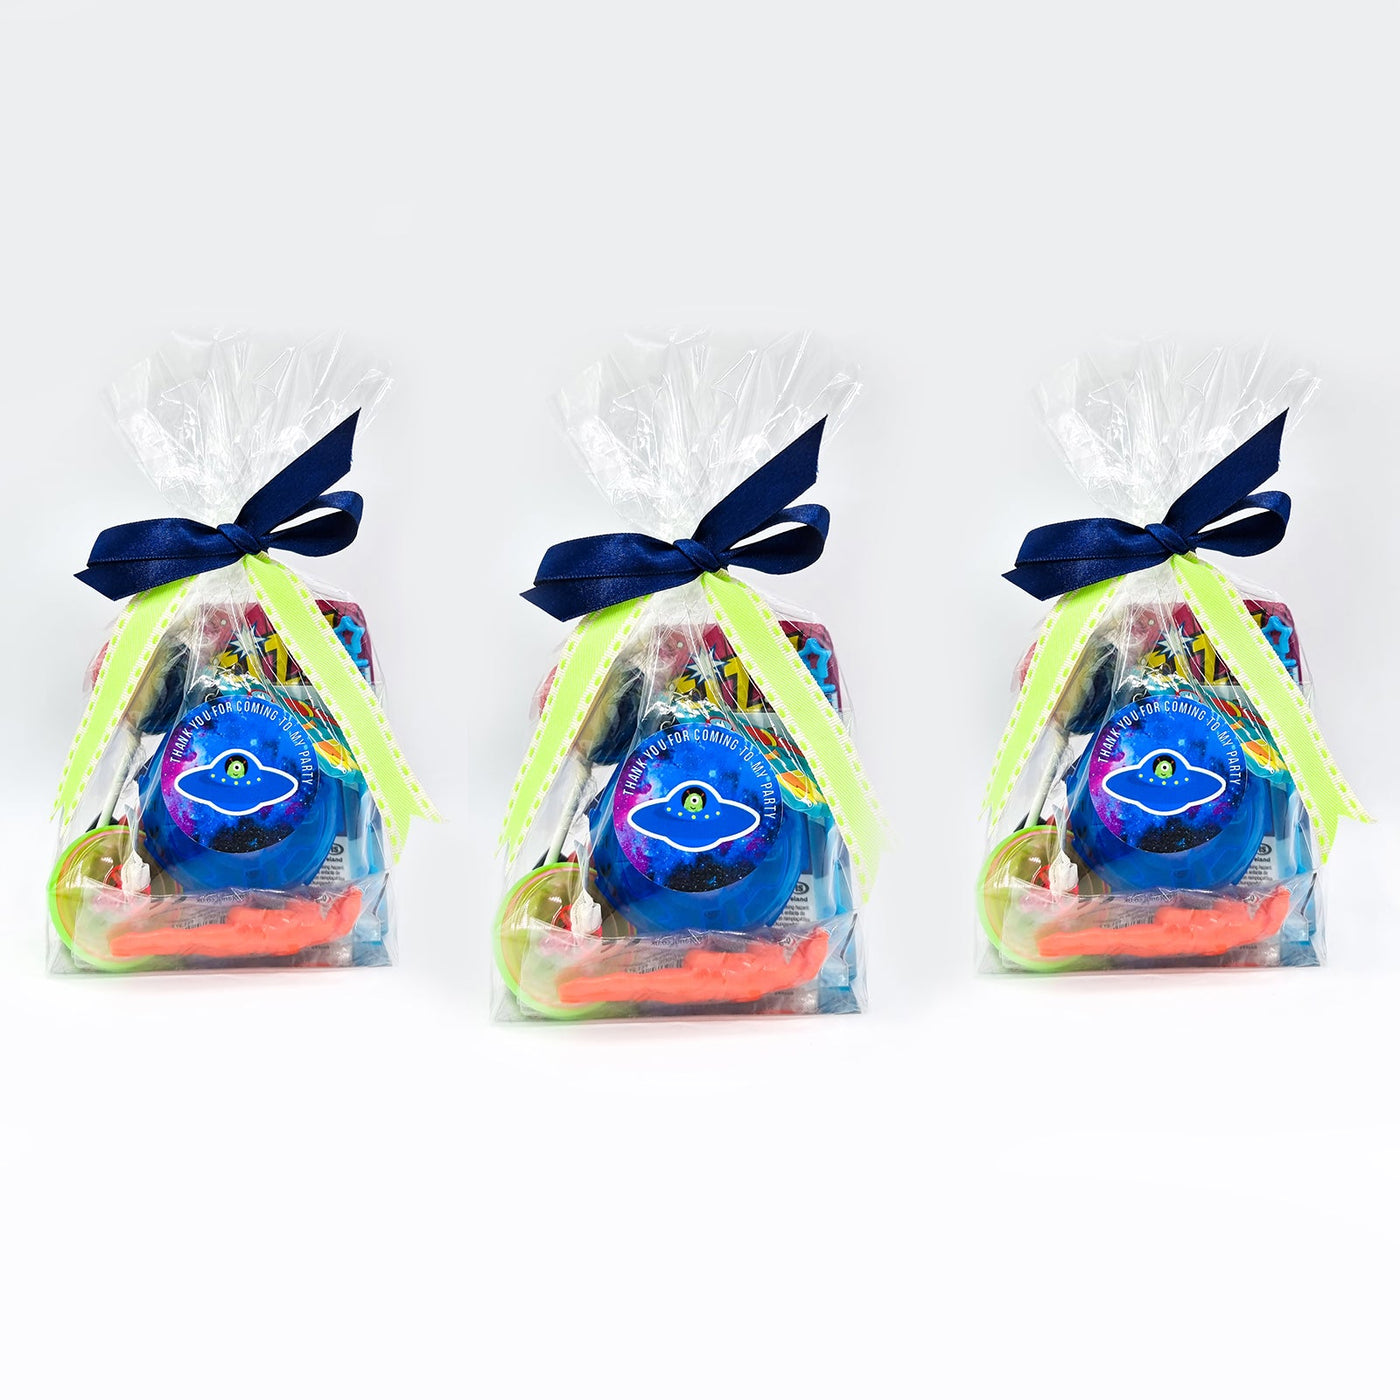 Unisex Pre Filled Alien Cosmos Birthday Party Bags, Party Favours With UFO Toy. 